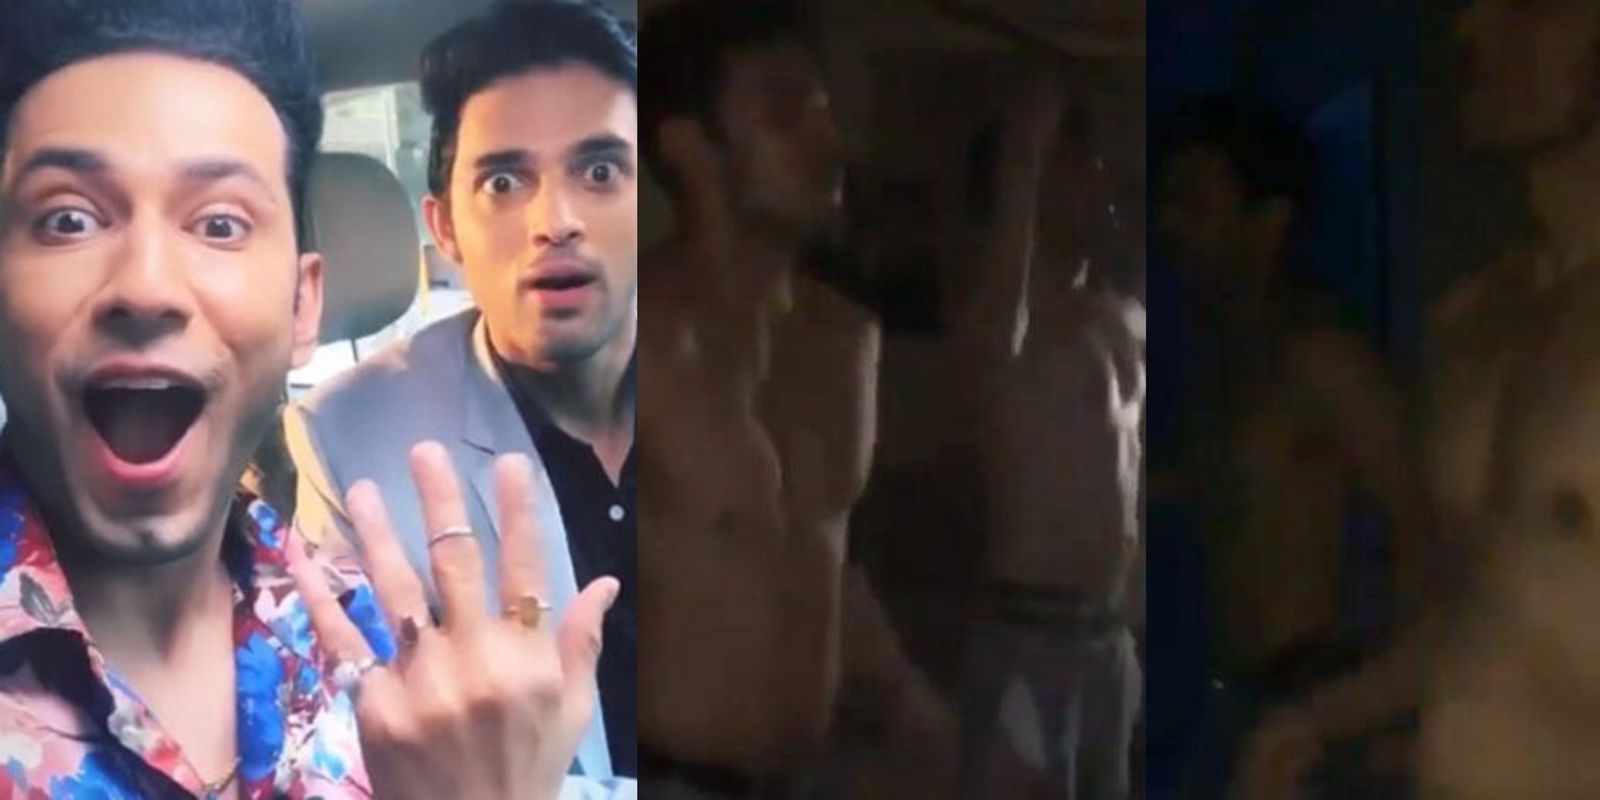 Kasautii Actors Parth Samthaan And Sahil Anand Turn Desi Boyz 2.0, Dance Shirtless To The Song! Watch Video...